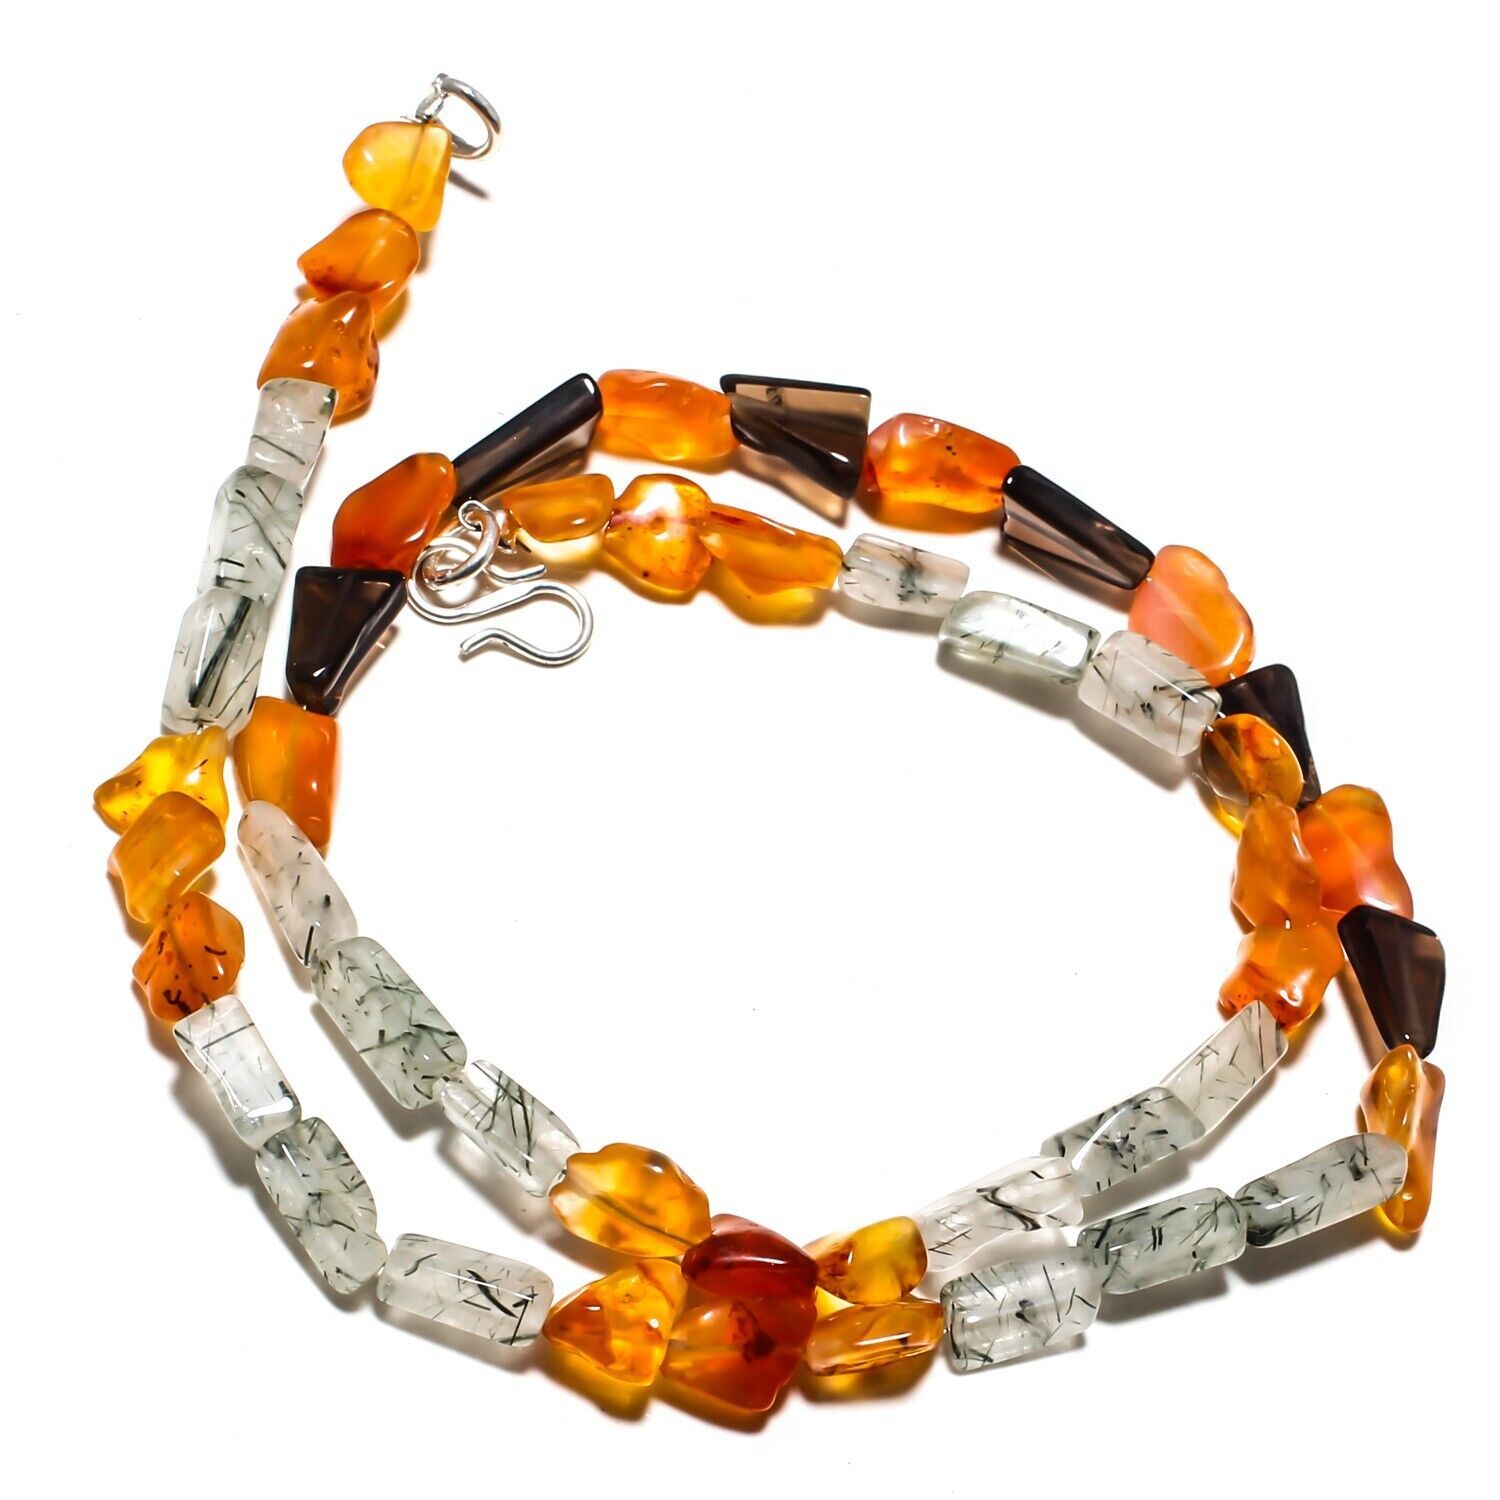 Primary image for Carnelian Natural Gemstone Beads Jewelry Necklace 17" 96 Ct. KB-897